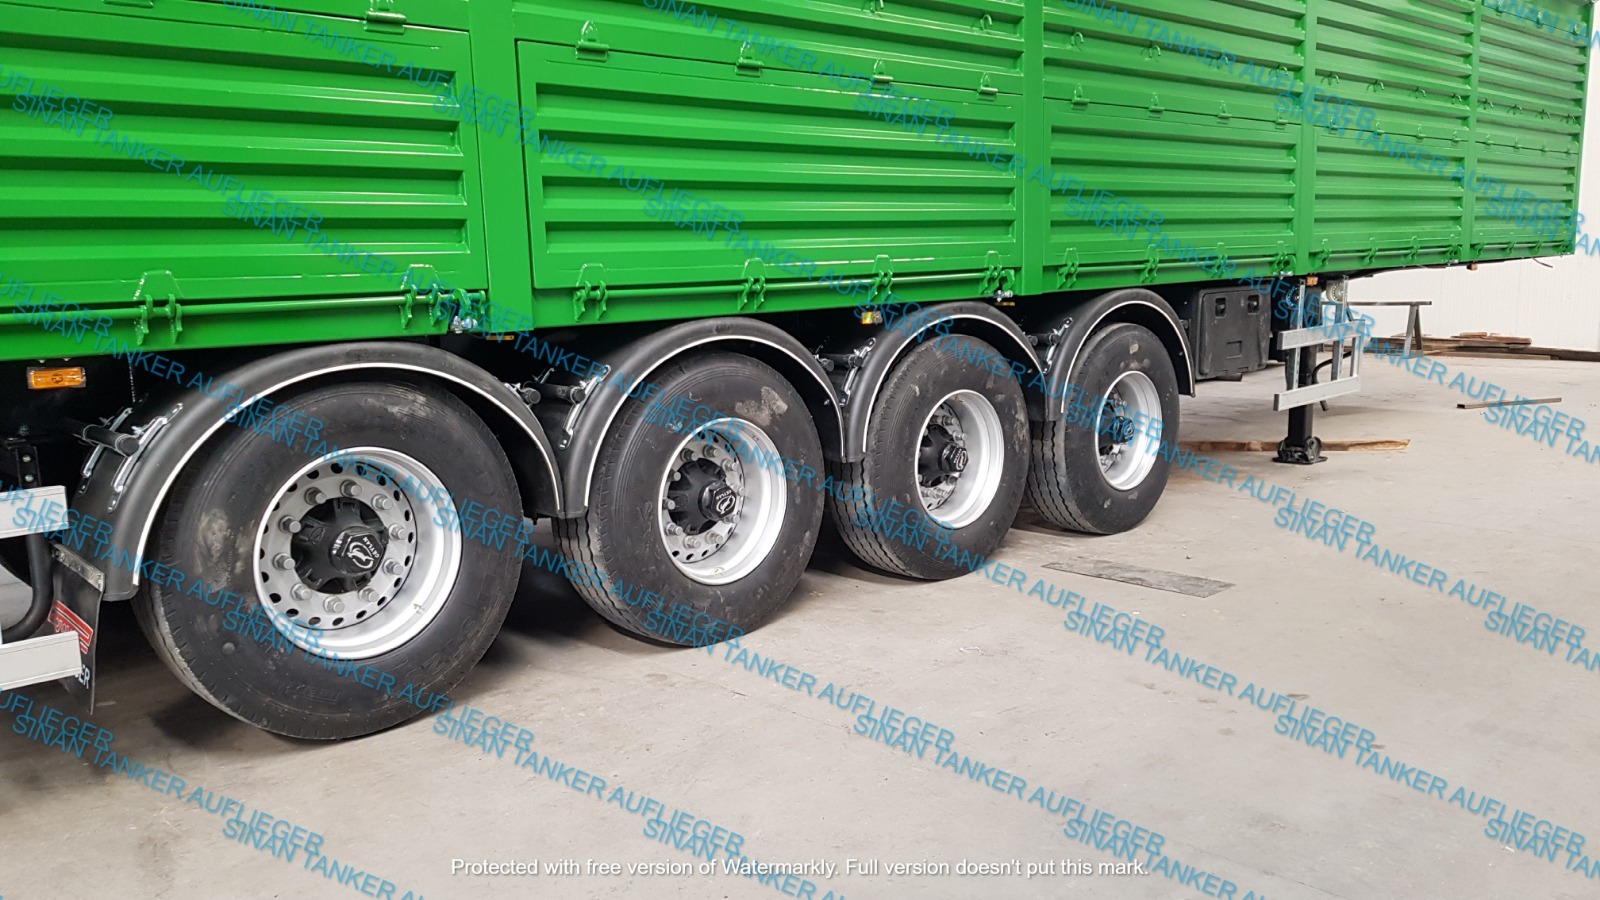 SİNANLI TANKER - TRAILER undefined: photos 19